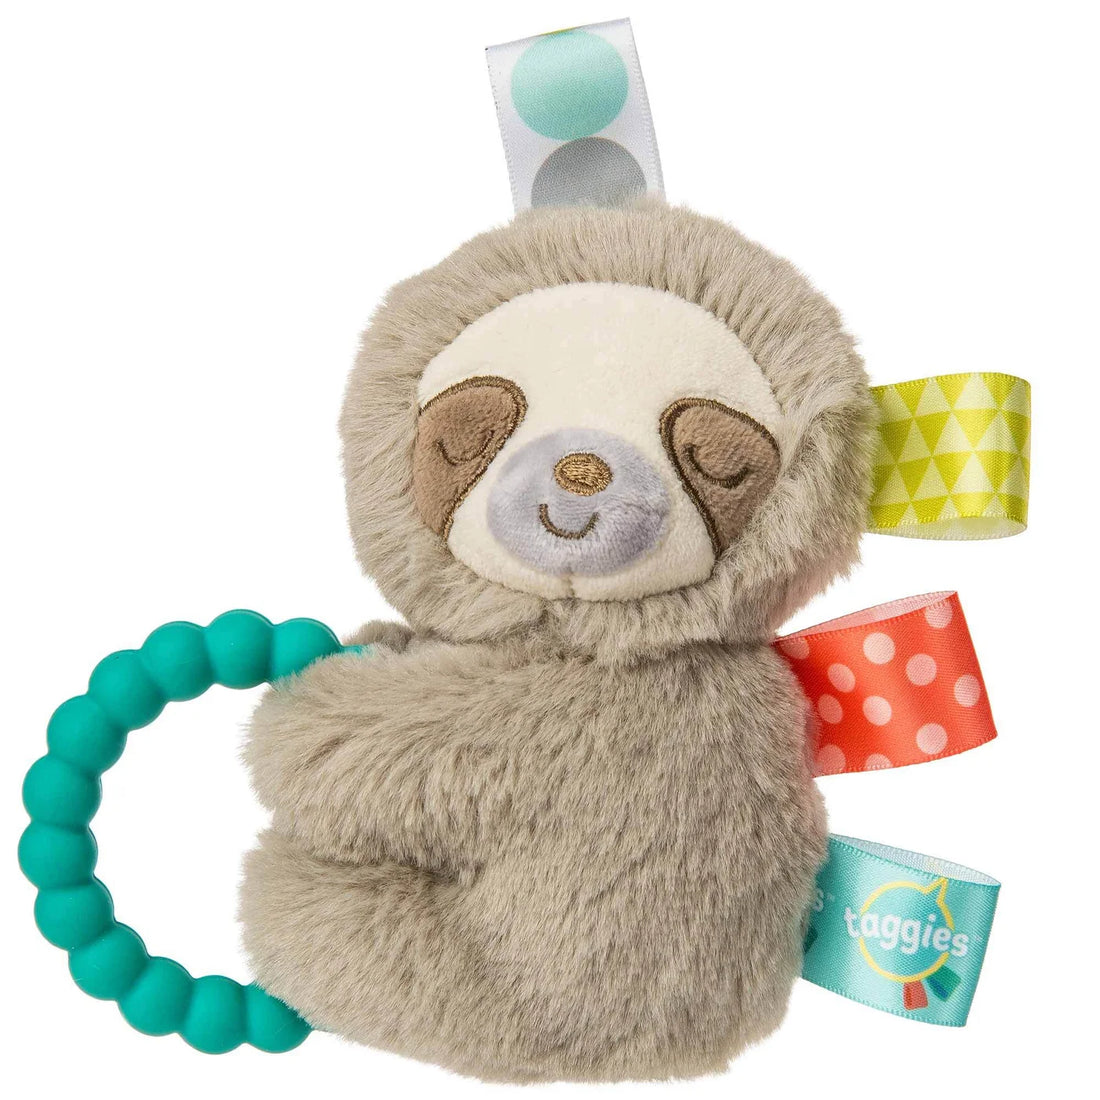 Taggies Teether Rattle - Molasses Sloth 5"